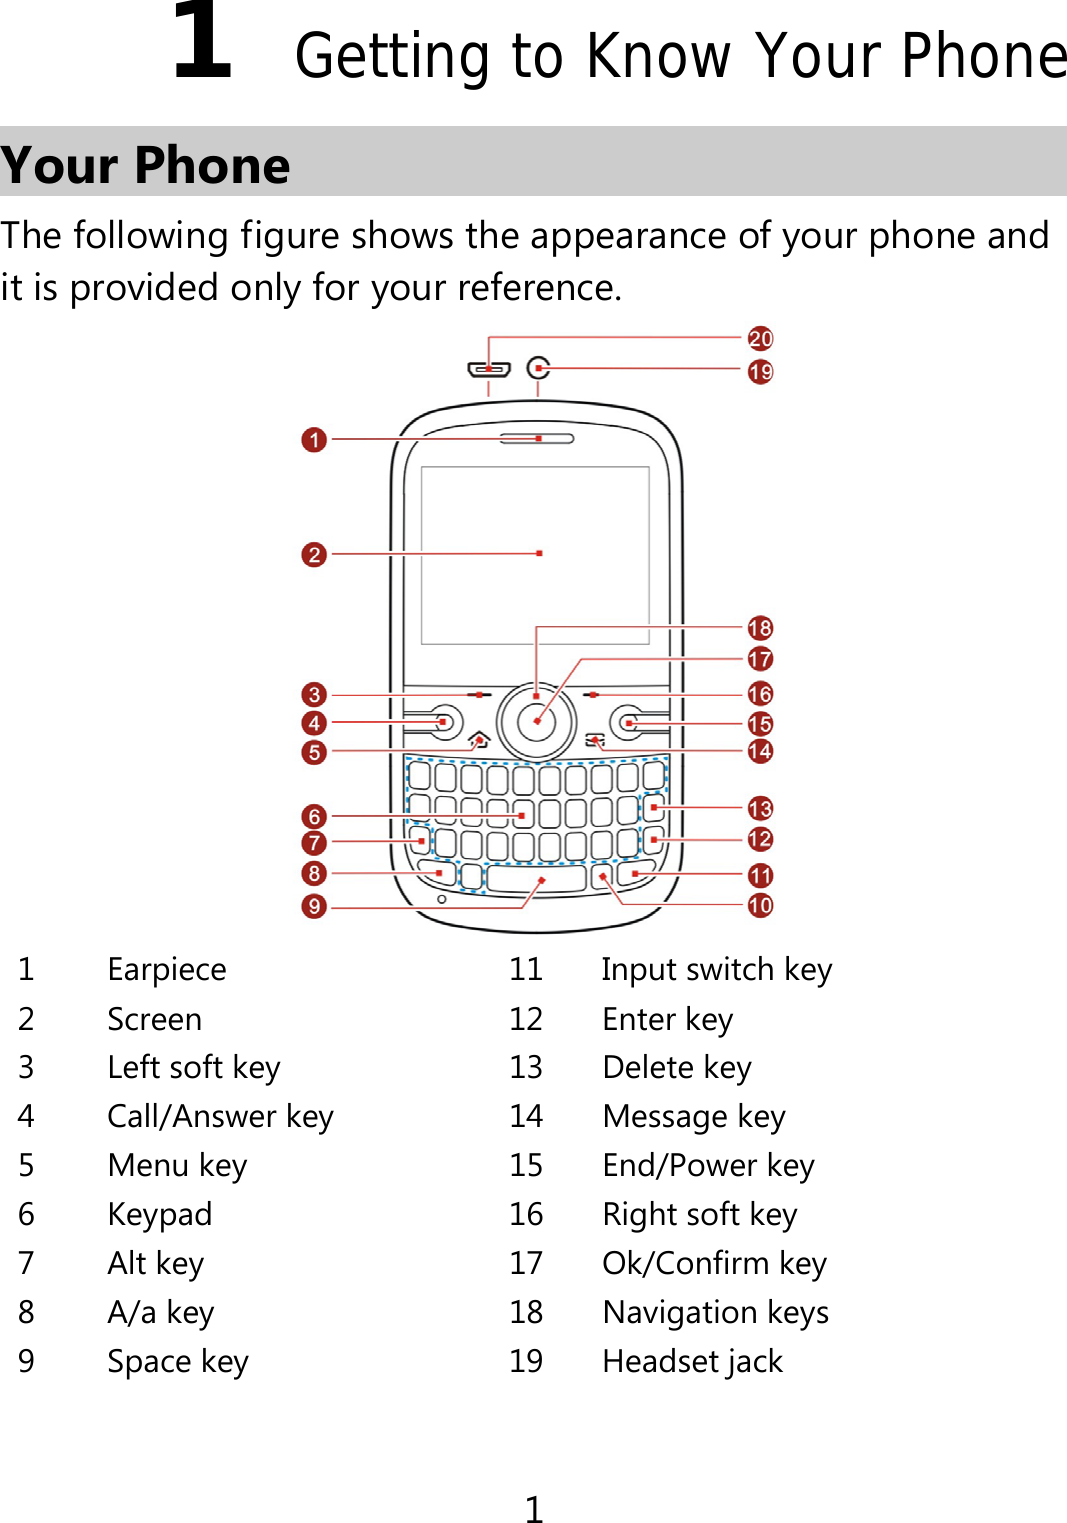 1 1  Getting to Know Your Phone Your Phone The following figure shows the appearance of your phone and it is provided only for your reference.  1  Earpiece  11 Input switch key 2 Screen  12 Enter key3  Left soft key 13 Delete key4 Call/Answer key  14 Message key5 Menu key  15 End/Power key 6  Keypad  16 Right soft key 7 Alt key  17 Ok/Confirm key 8 A/a key  18 Navigation keys 9  Space key  19 Headset jack